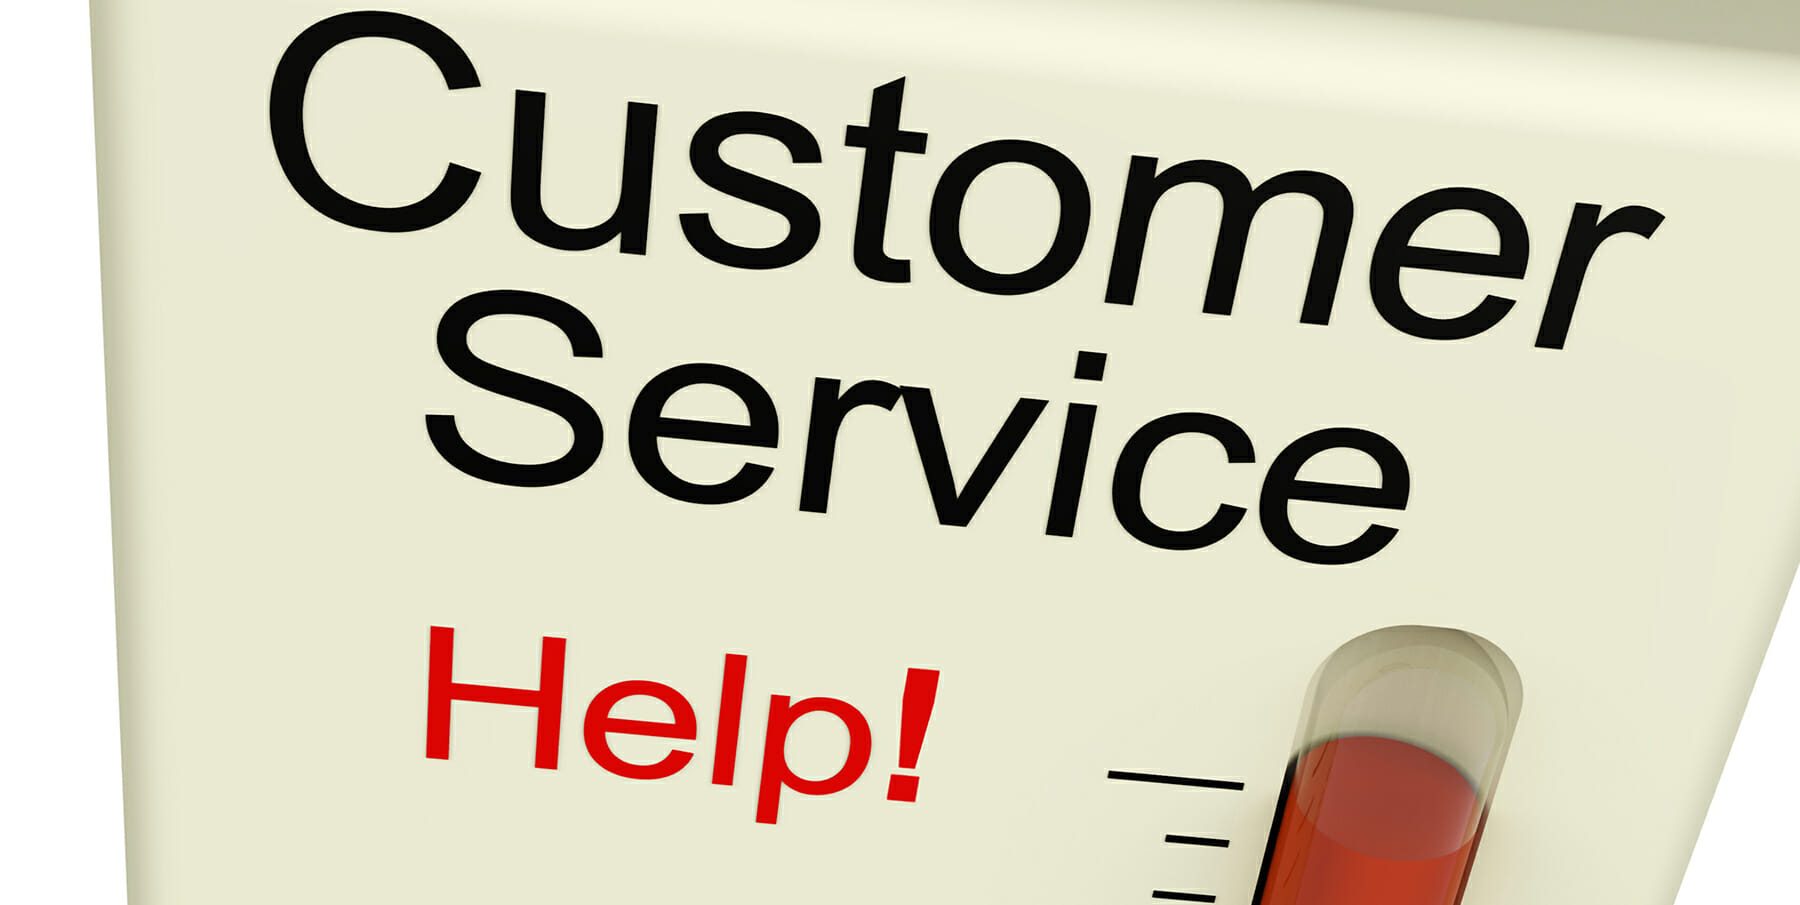 customer-service-help-meter-shows-assistance-guidance-and-support_gy6lpnwu.jpg